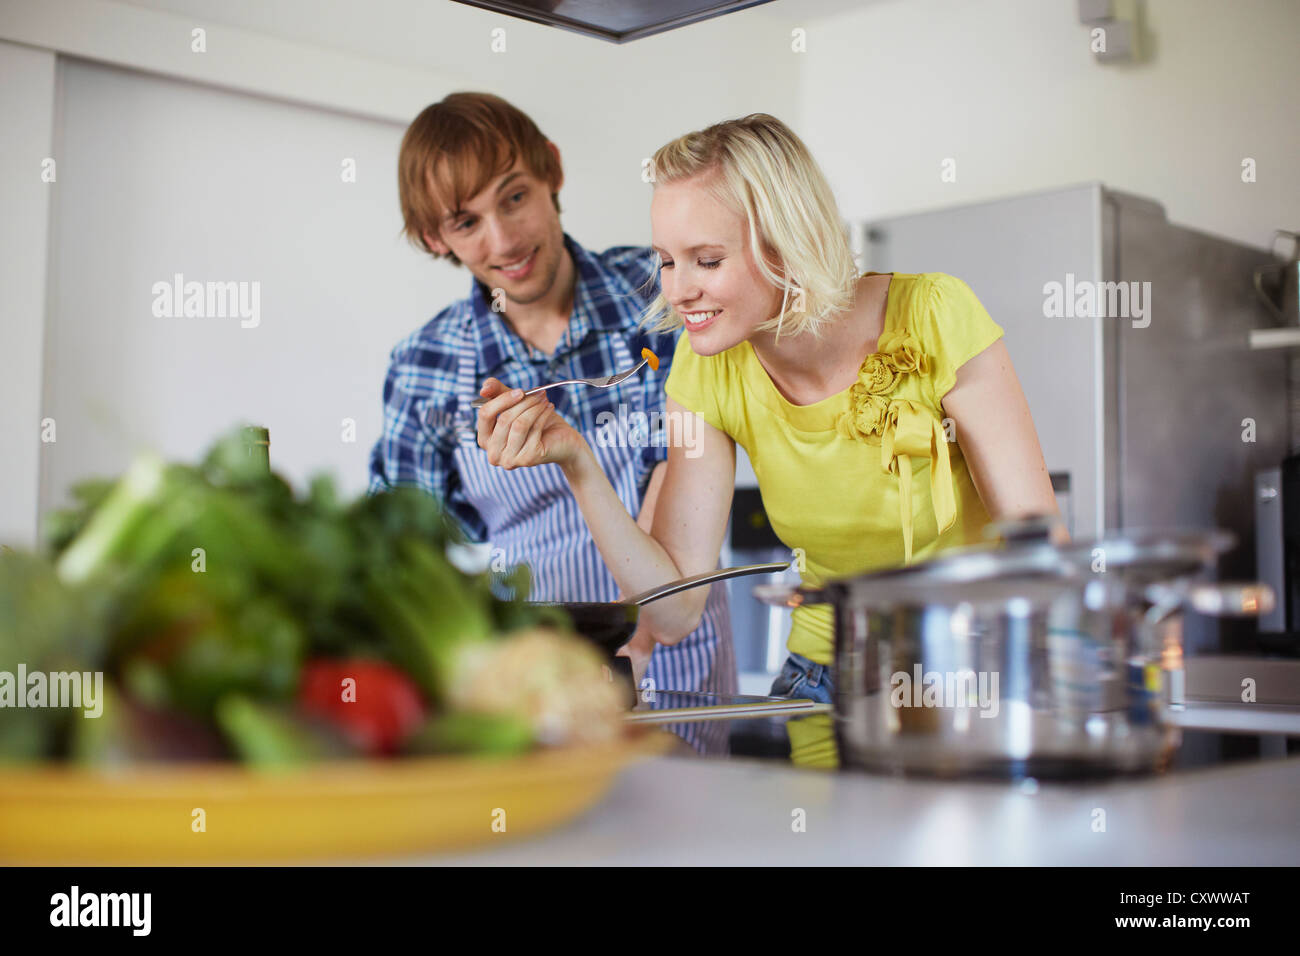 Couple cooking together in kitchen Banque D'Images